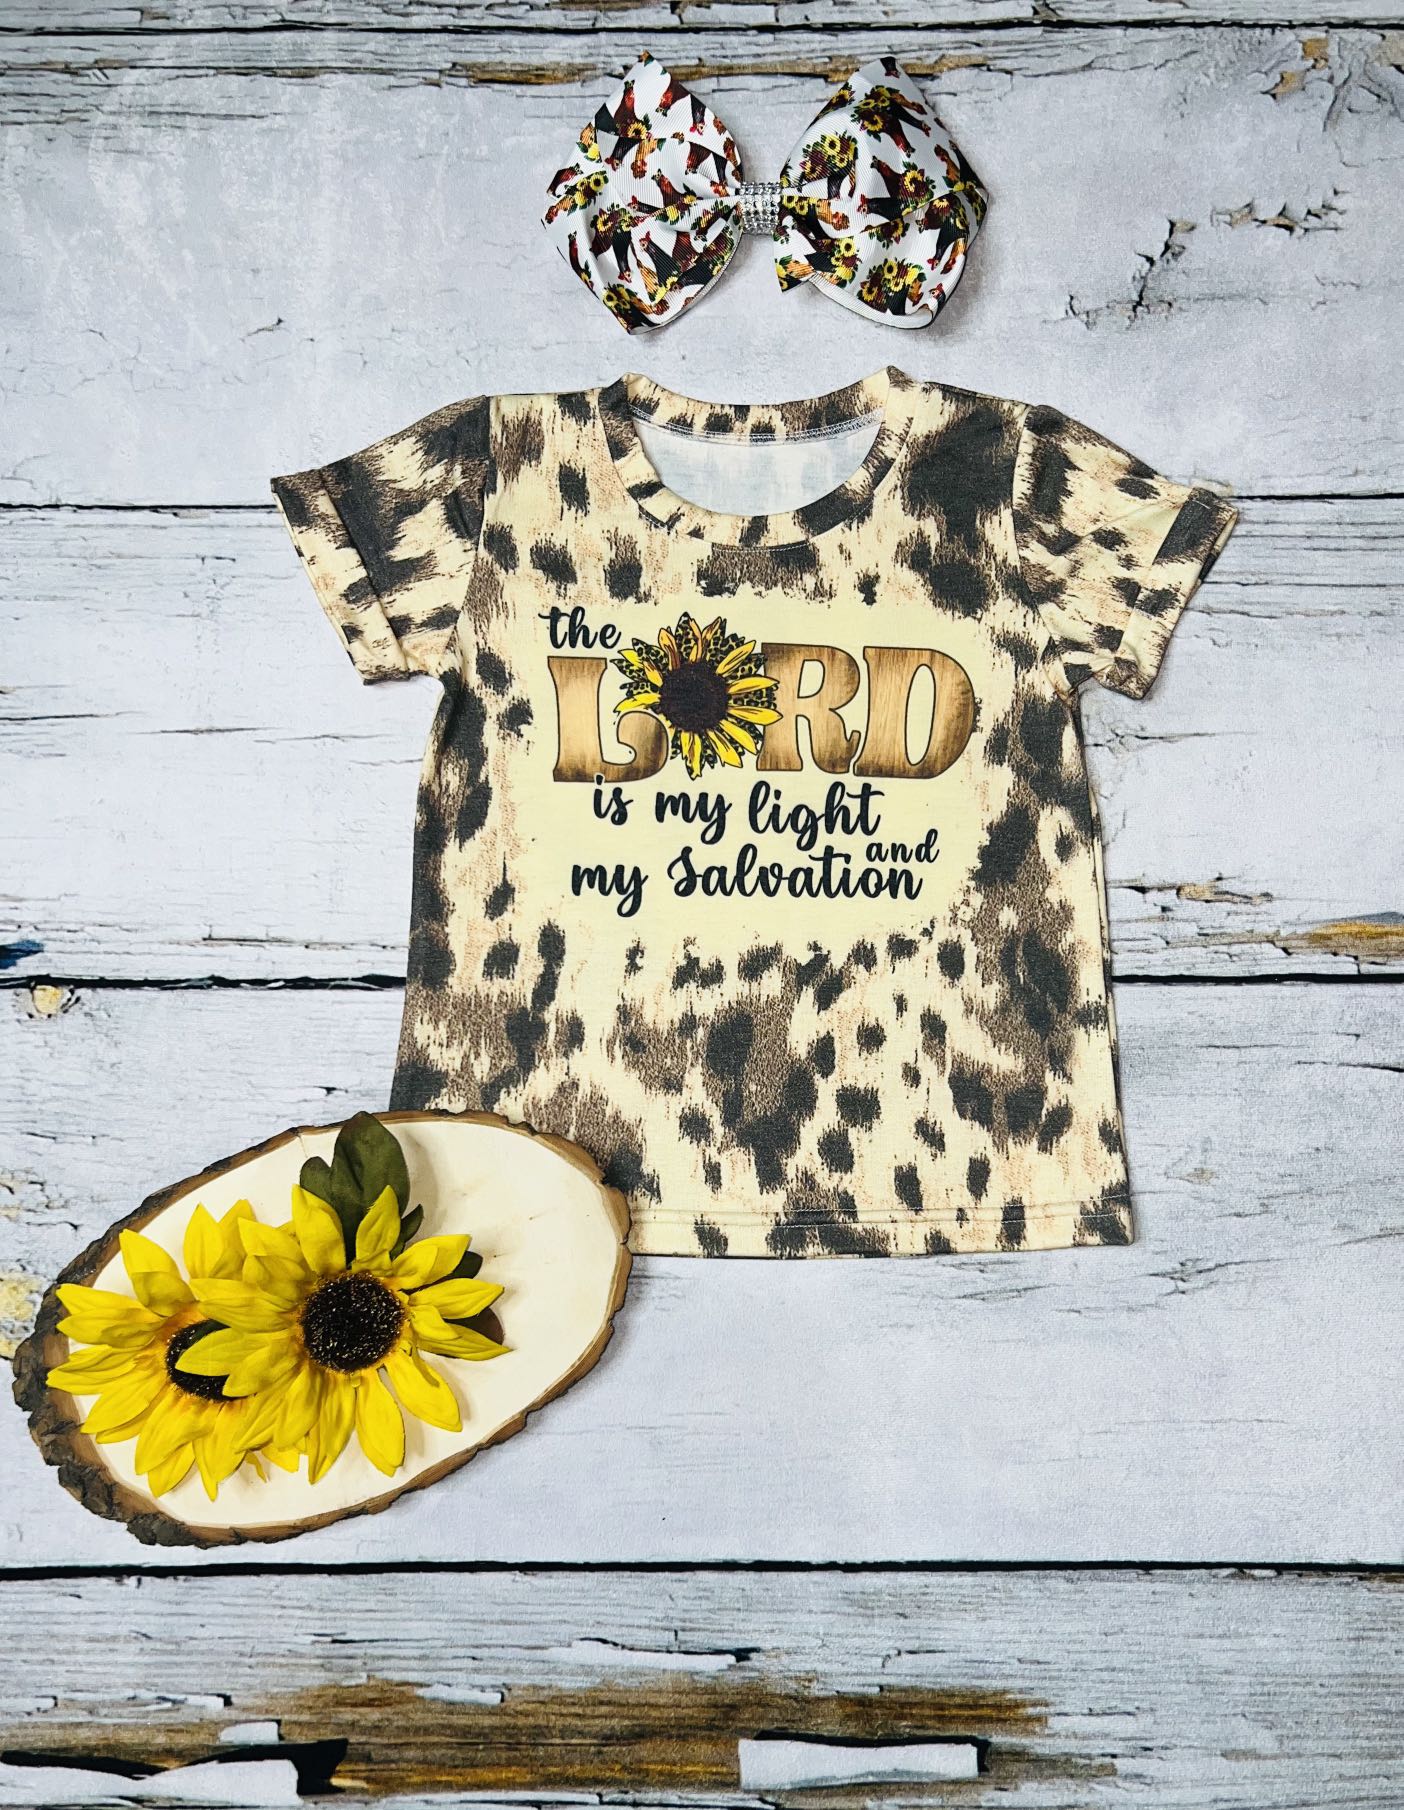 "The Lord Is My Light And My Salvation" short sleeve t-shirt DHL0923-10